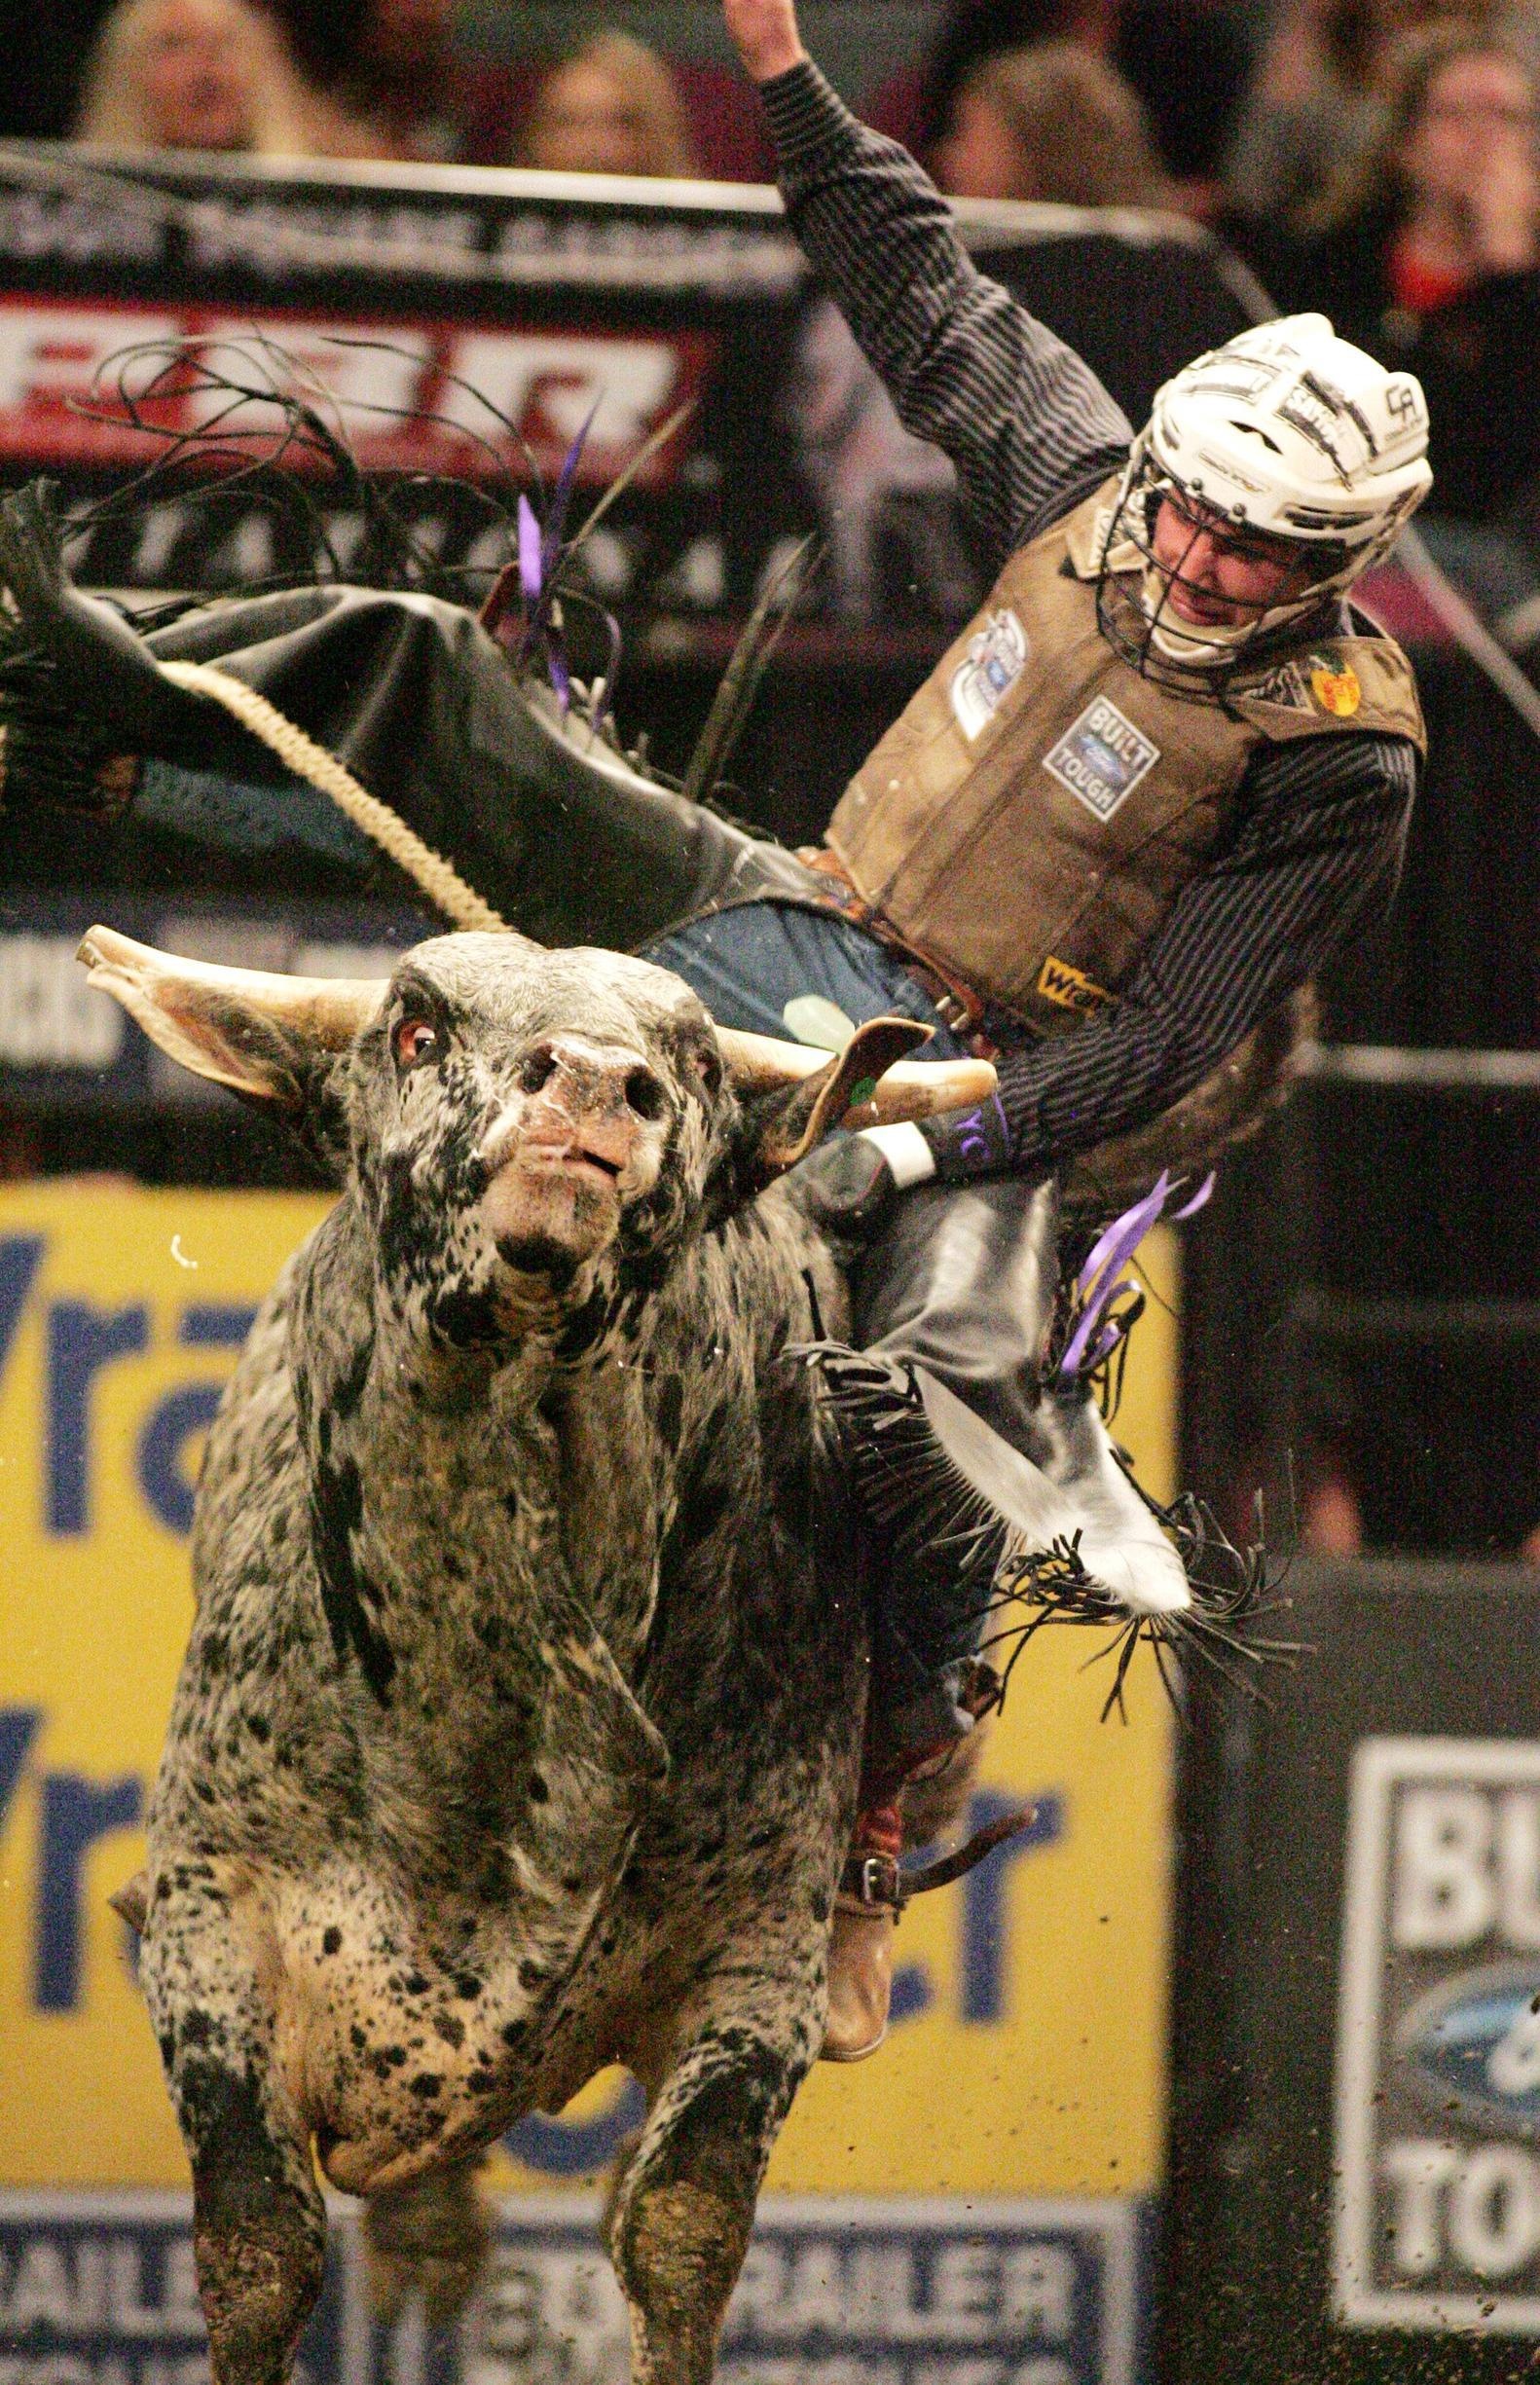 Bullriding: Rodeo sport, Animal tries to buck off the rider, Western, Cowboy, Extreme sport, Bullfighter, Rodeo bull. 1590x2450 HD Wallpaper.